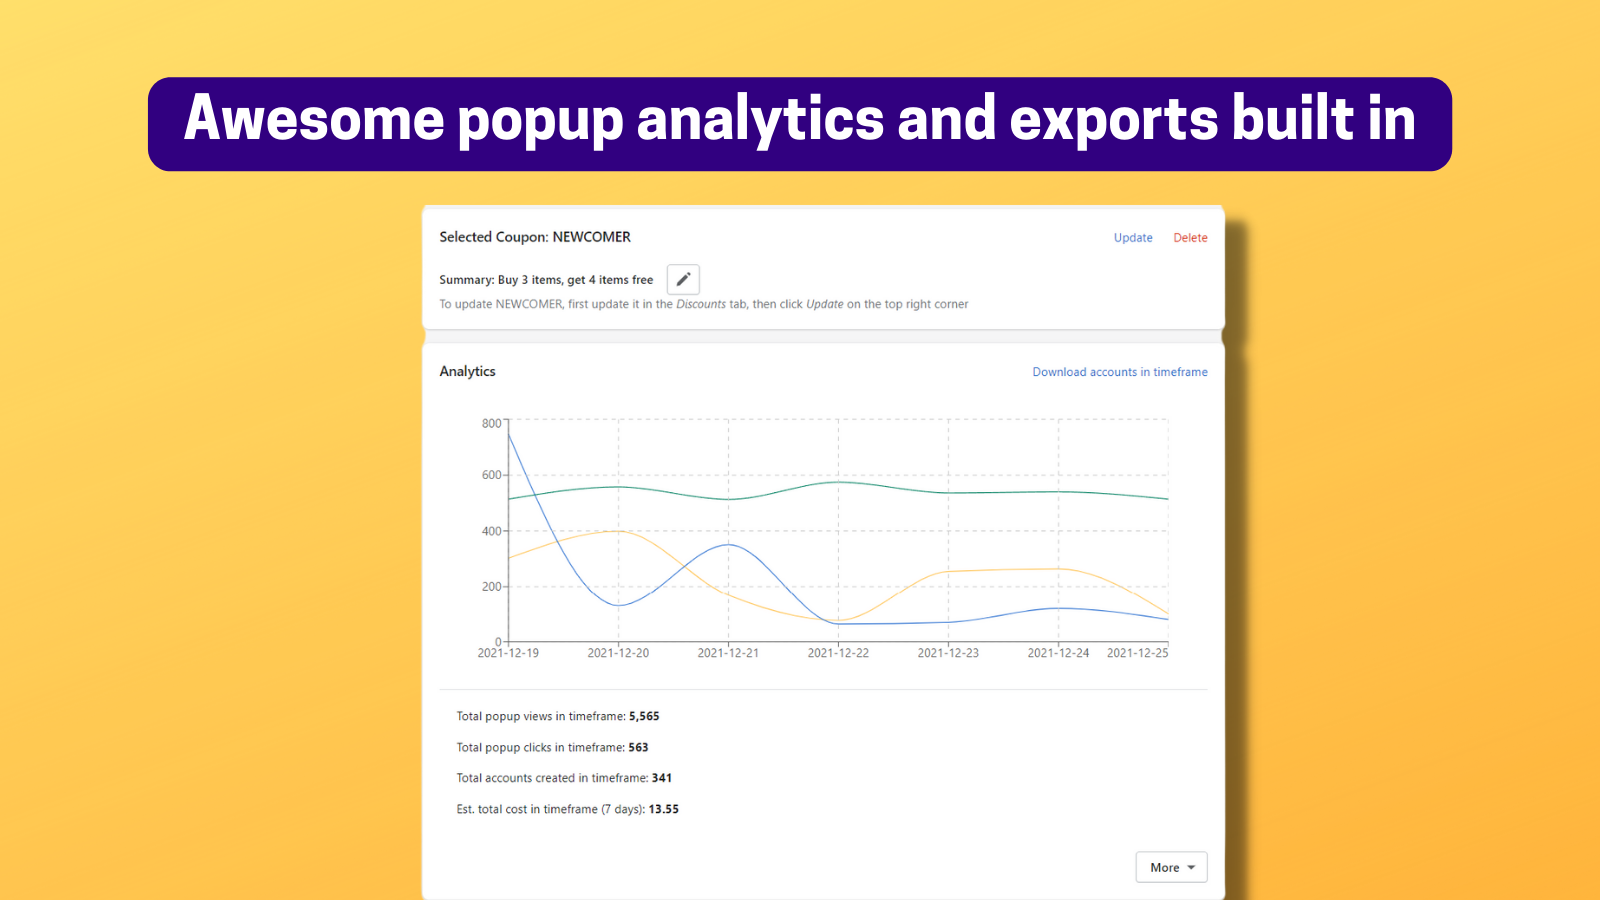 Analytics, toggle button, and statistics shown